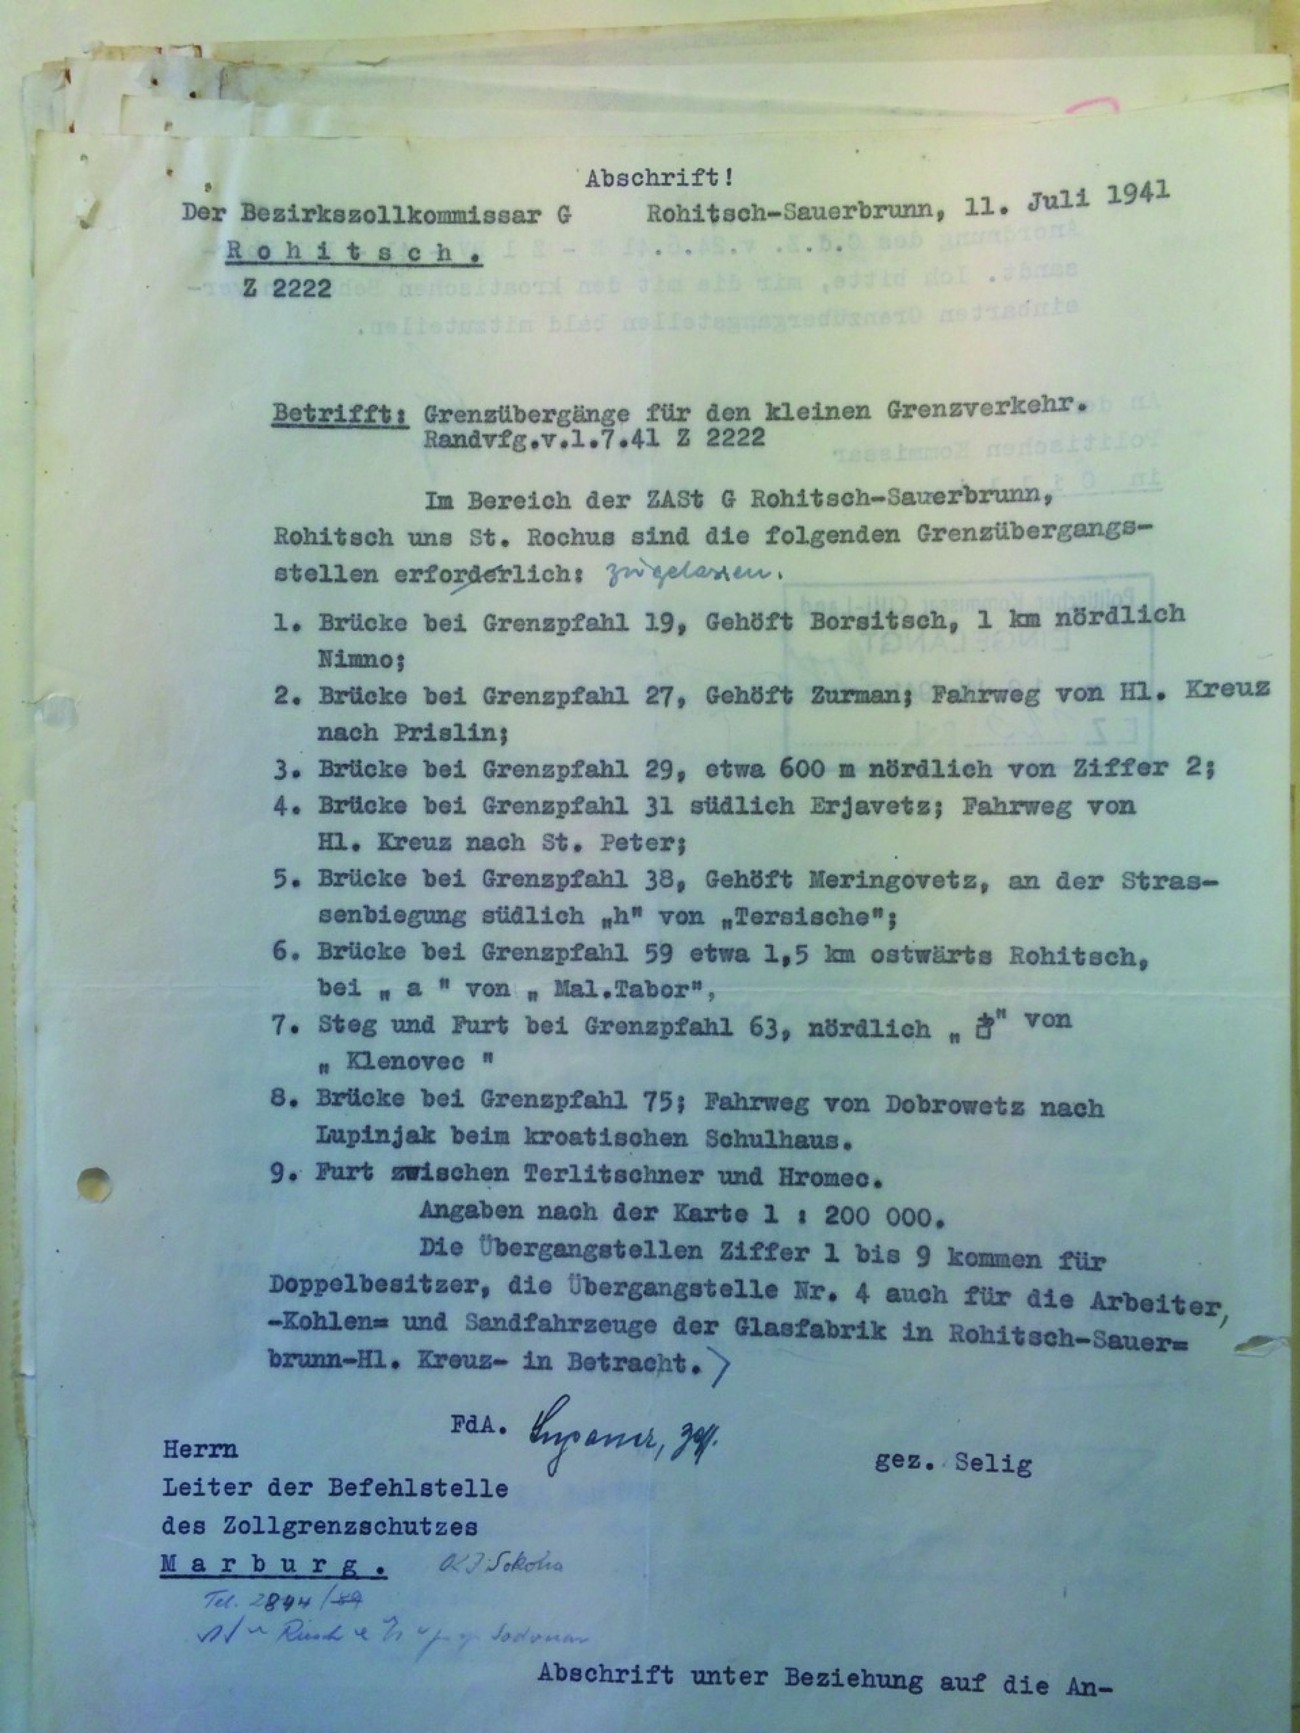 A report from the Rogatec District Customs Office regarding the border crossings for local border traffic in the sector between Rogaška Slatina, Rogatec and Sveti Rok. In the agreement reached on 11 July 1941 in Rogaška Slatina, they established 9 points for the legal crossing of the German-Croatian border. Archives of the RS.